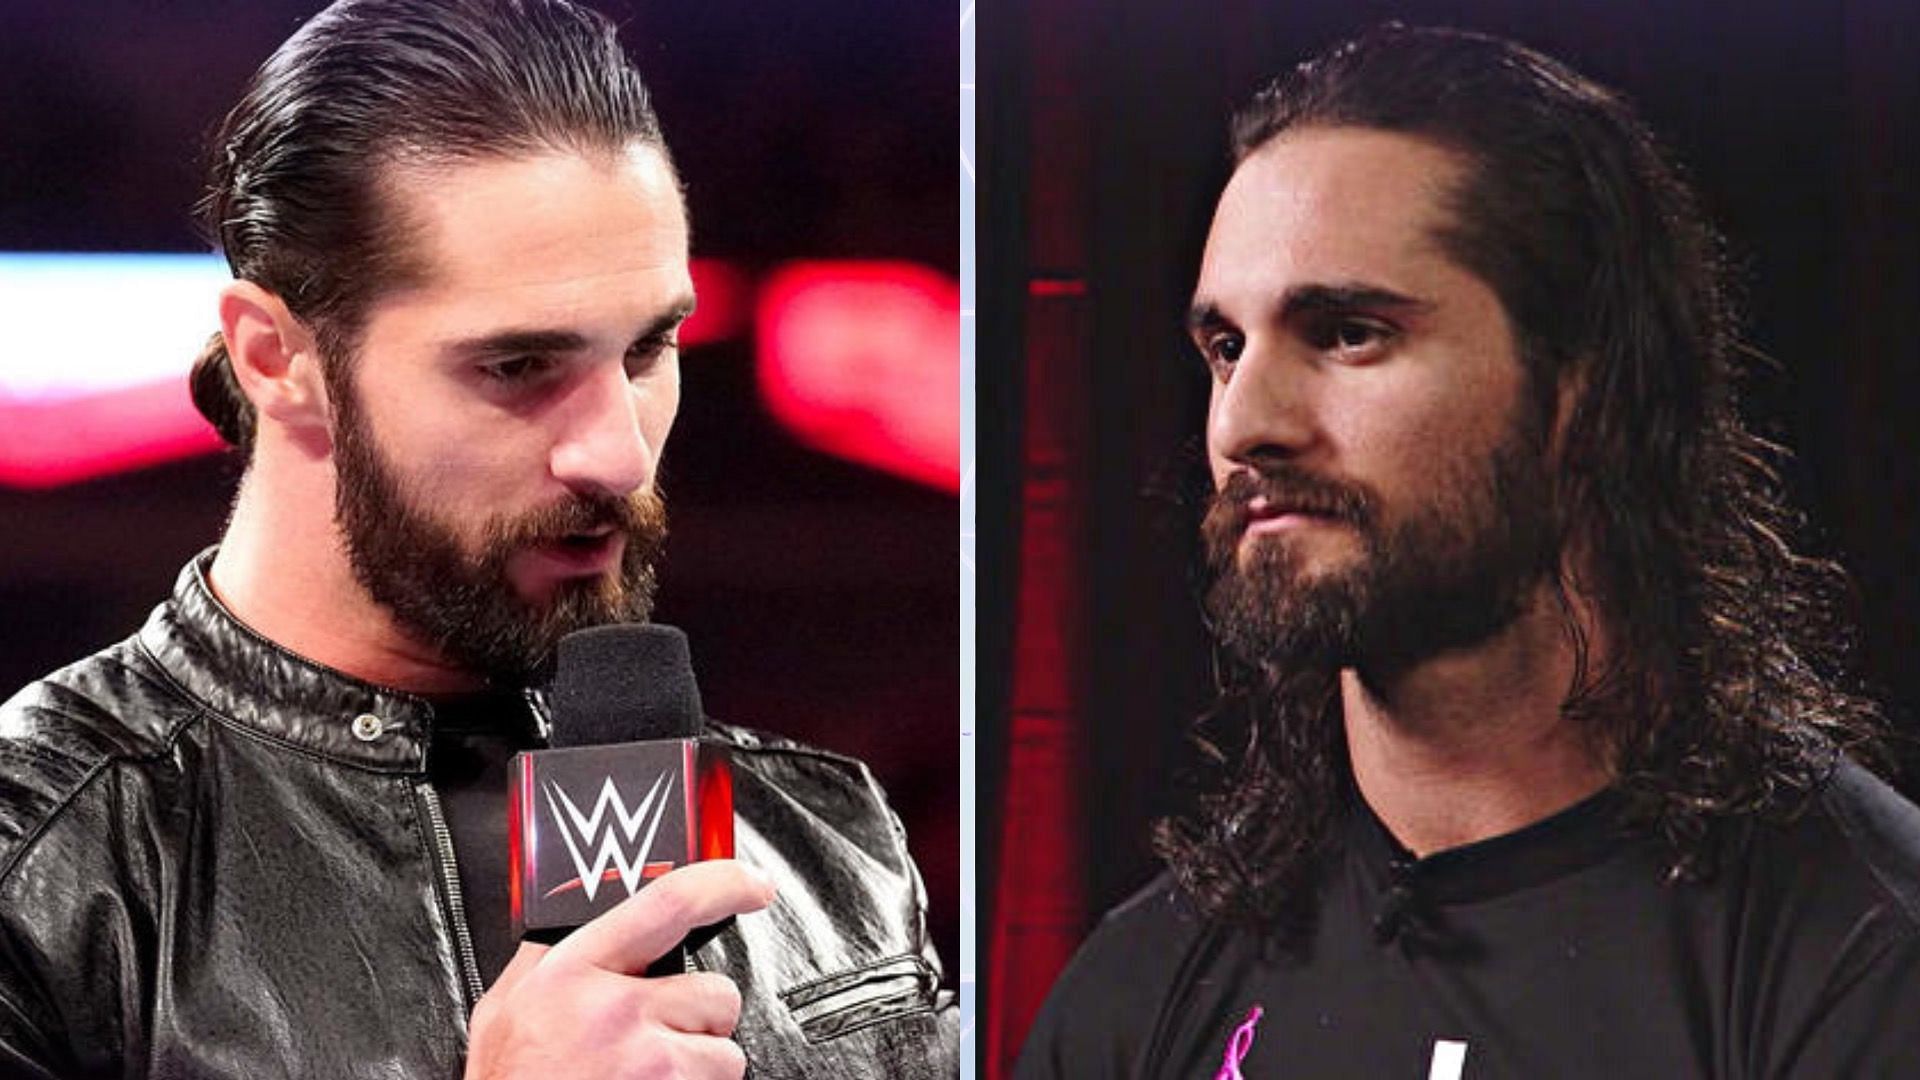 Seth Rollins has been pulled from advertising for WWE RAW